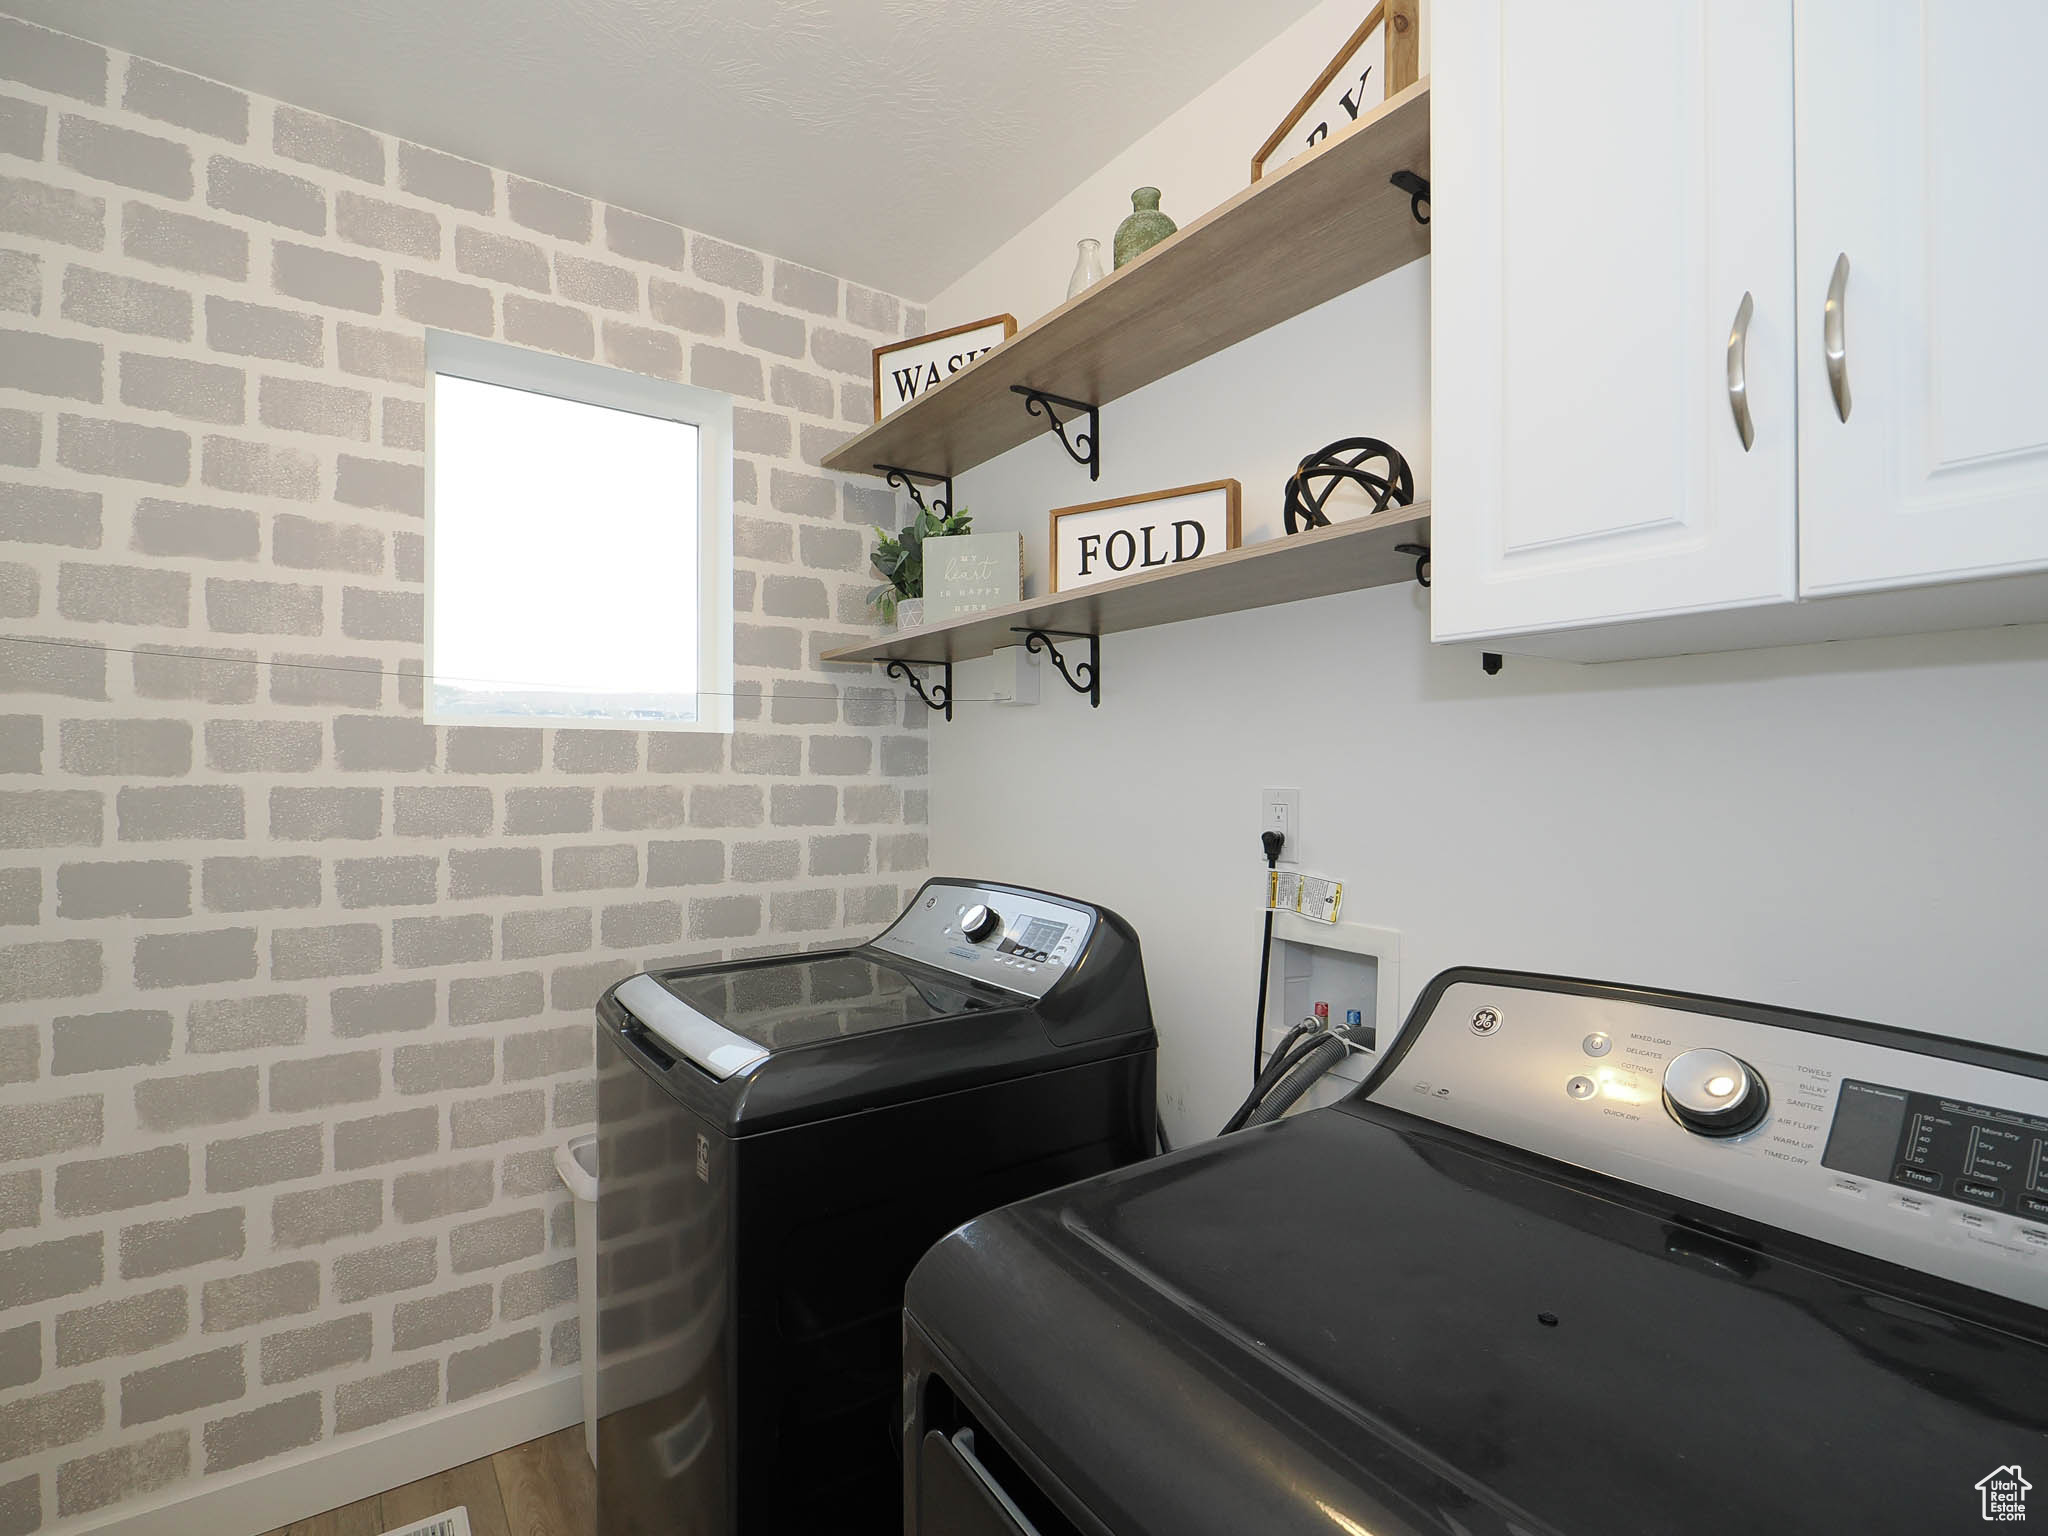 Laundry room featuring hardwood / wood-style floors, cabinets, and washer / dryer